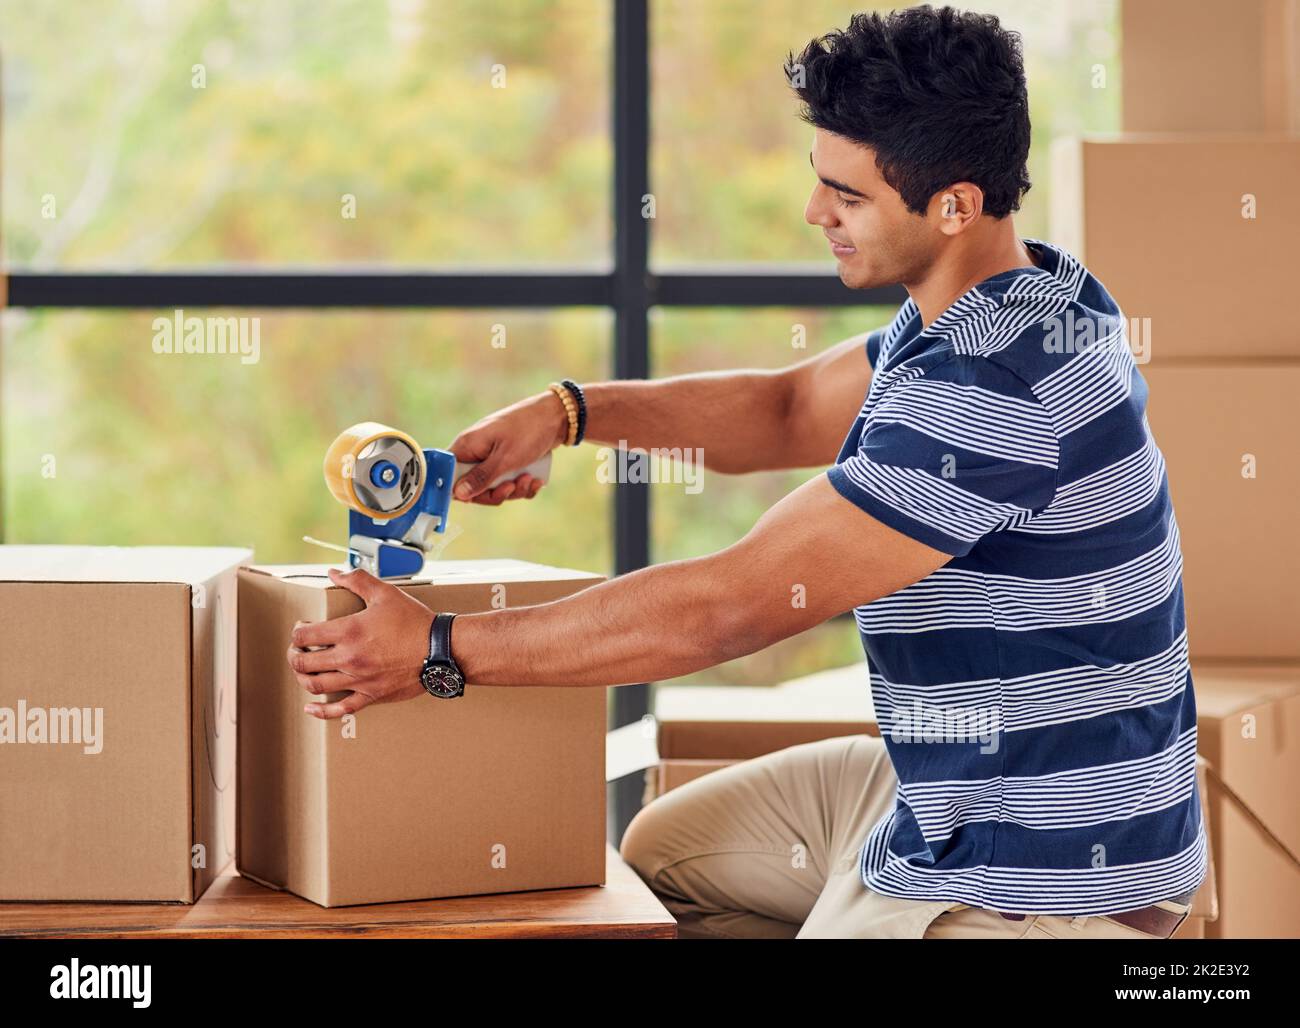 Packing up the last box. Shot of a young man taping up boxes on moving day. Stock Photo